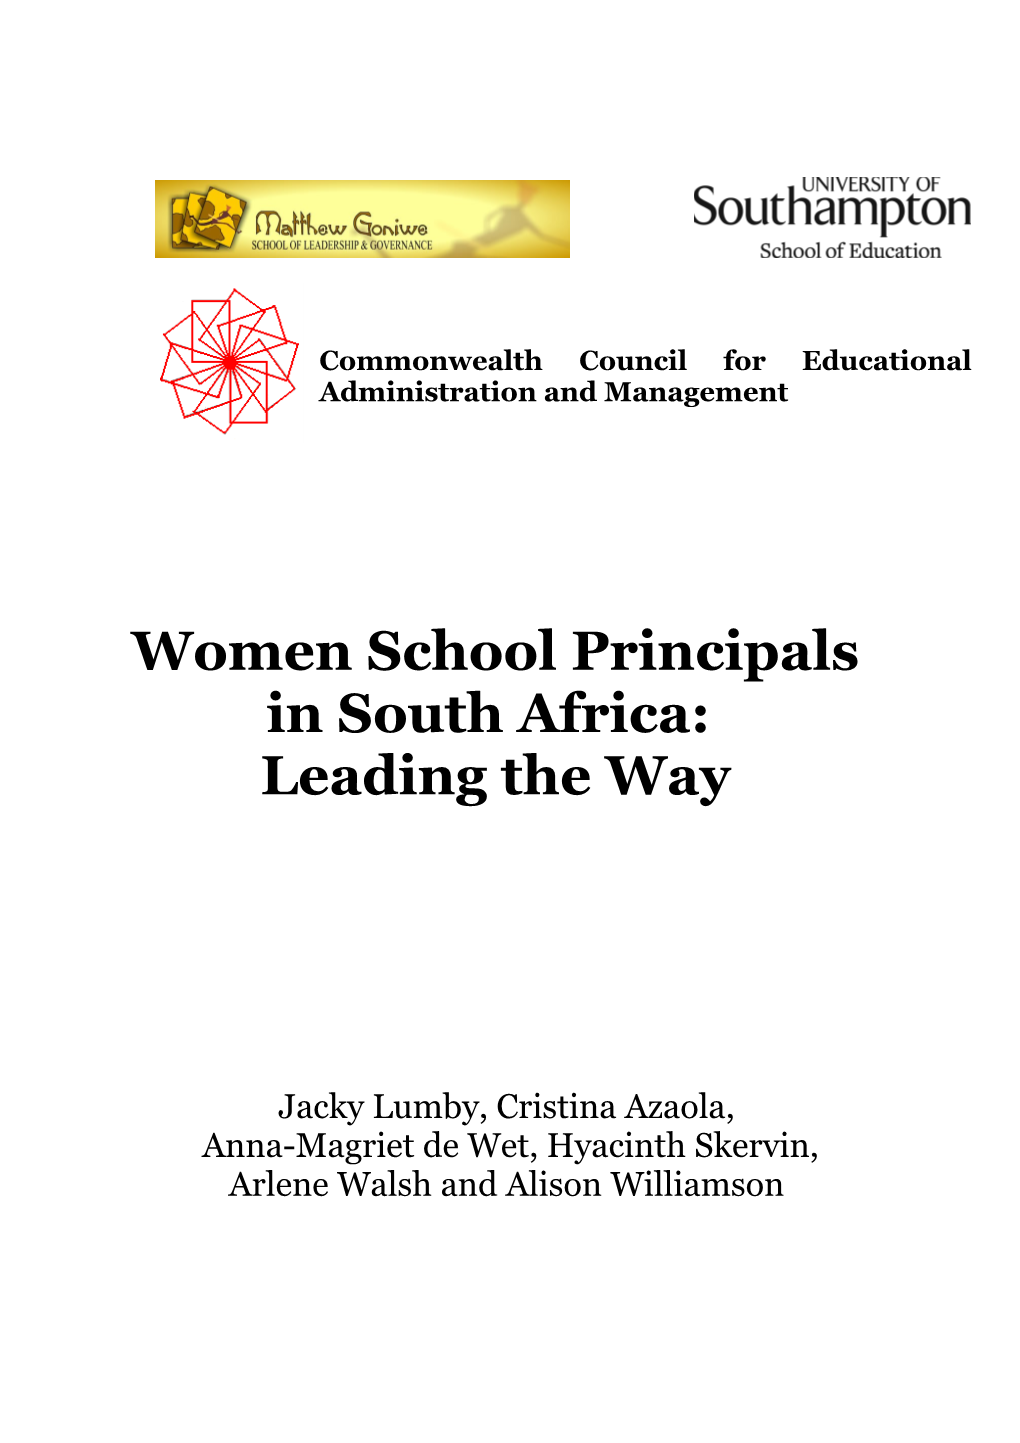 Women School Principals in South Africa: Leading the Way